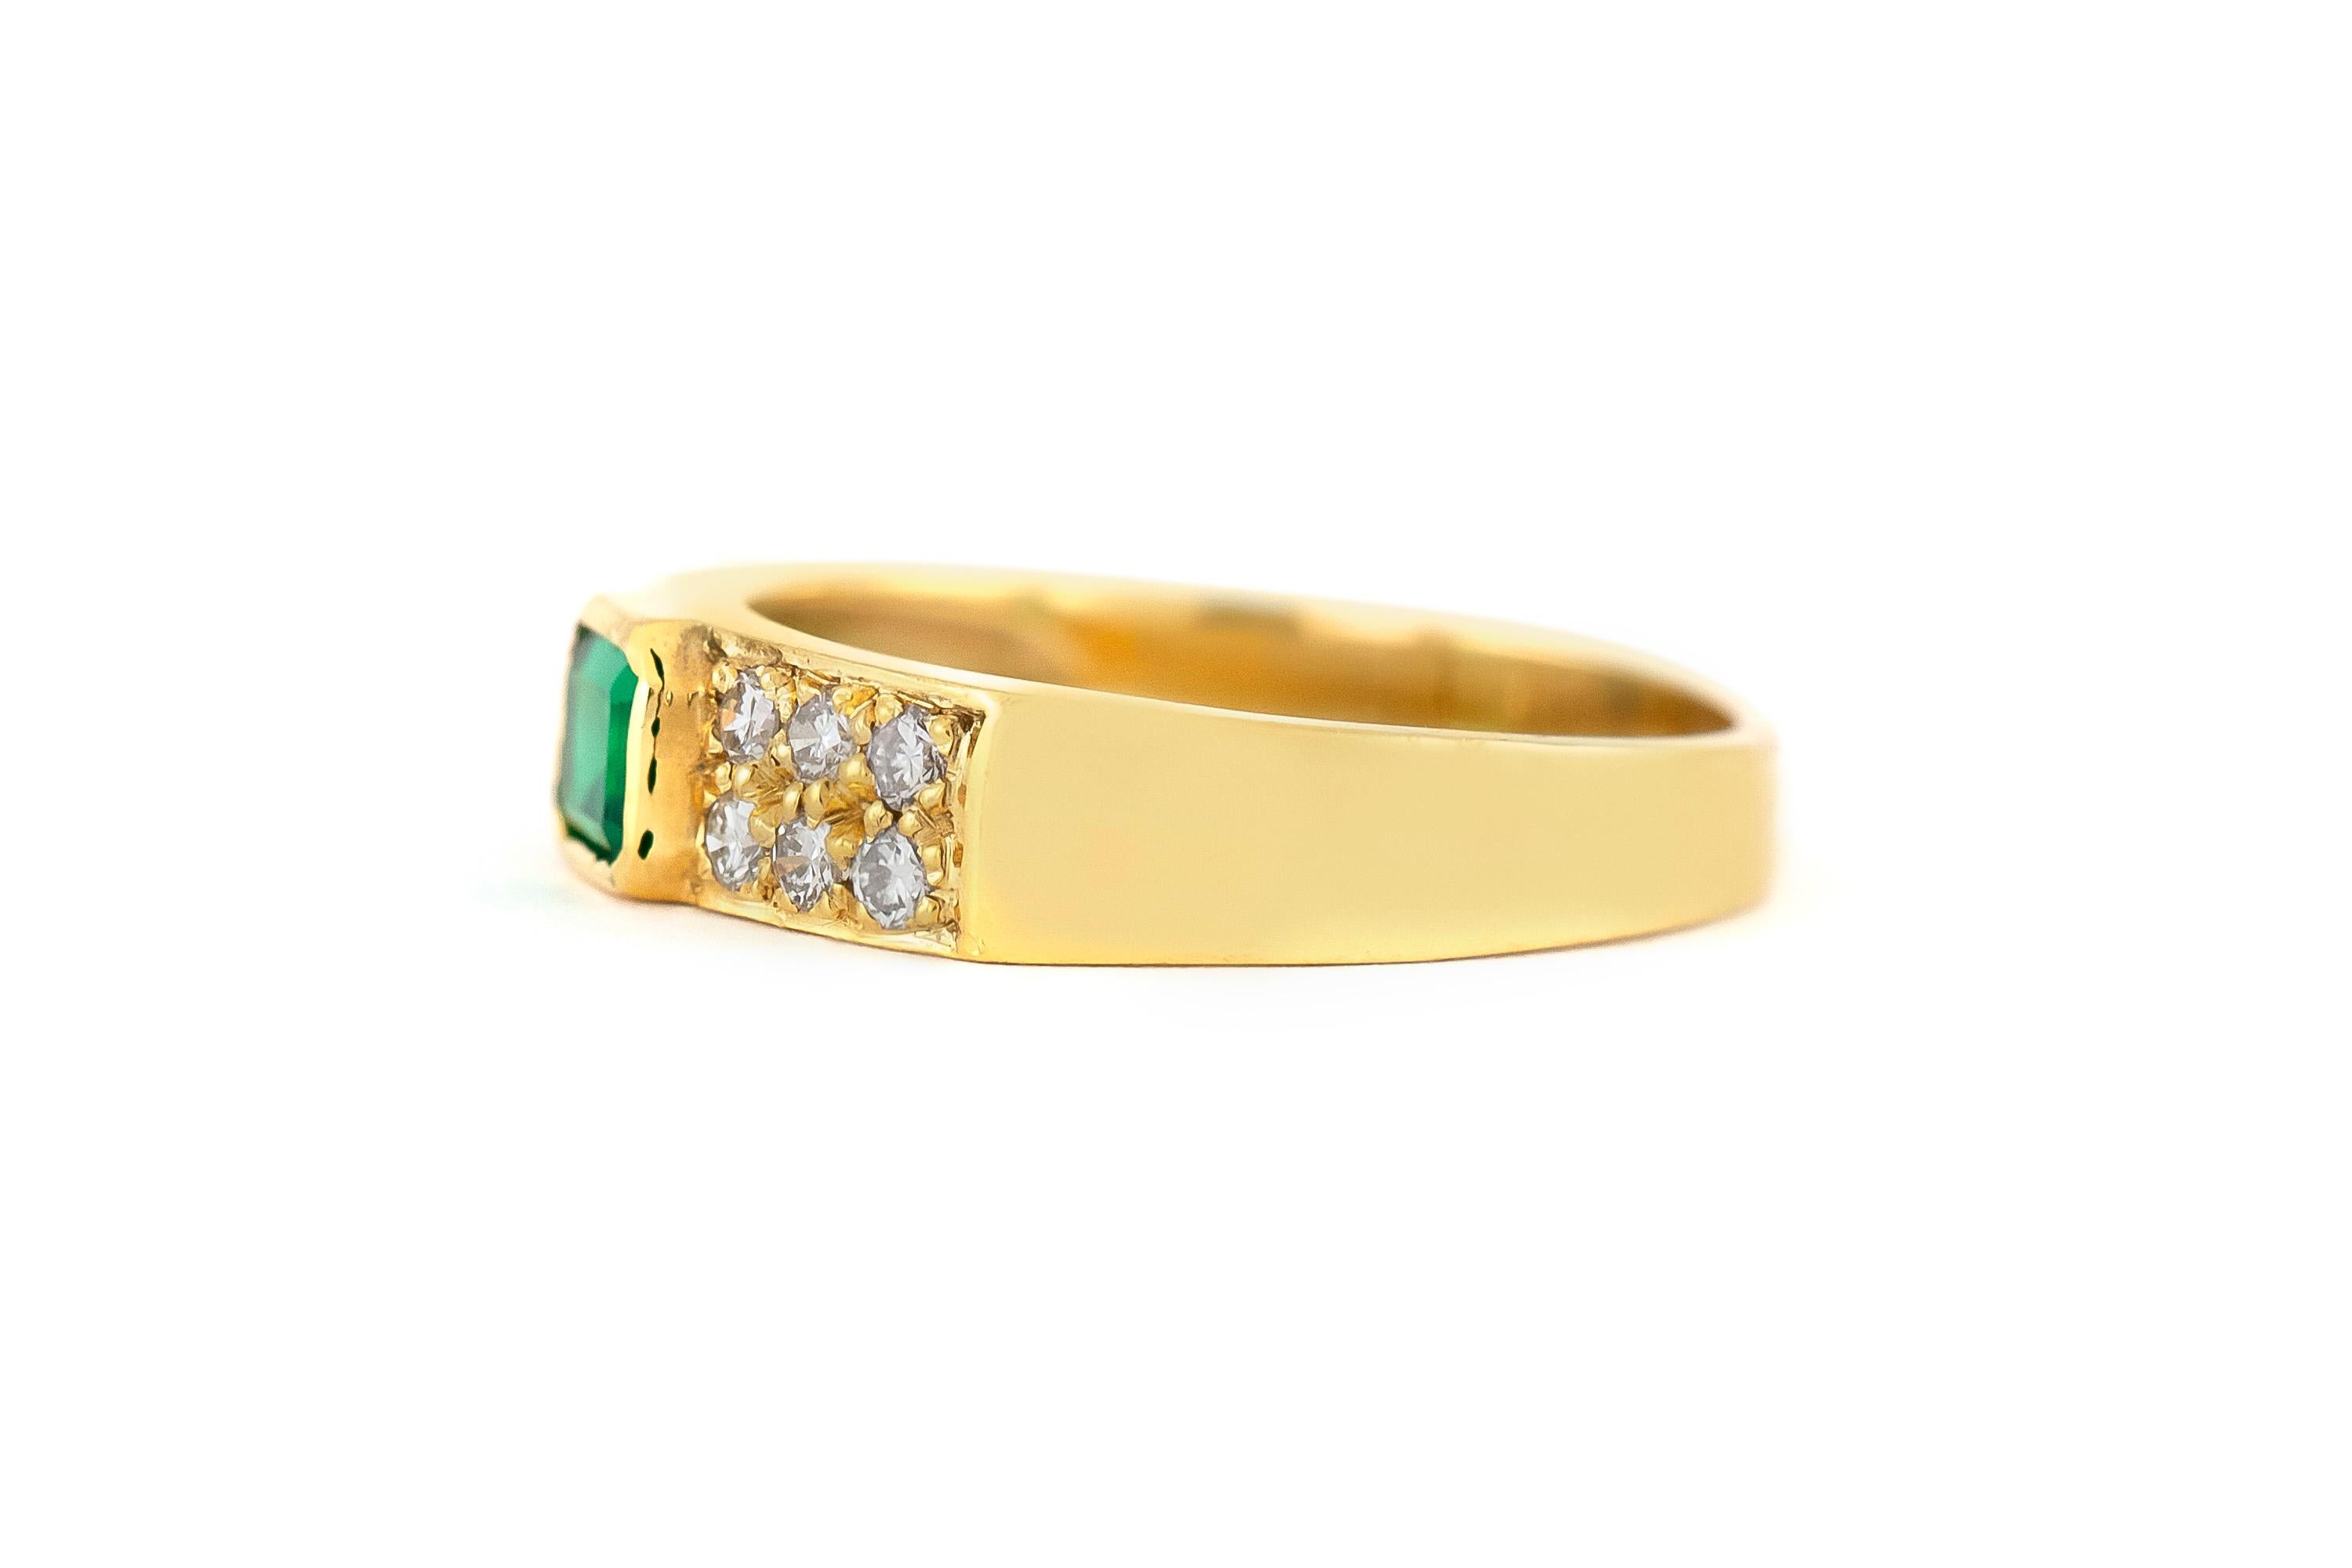 The ring is finely crafted in 18k yellow gold with center emerald weighing approximately total of 0.45 carat and diamonds weighing approximately total of 0.60 carat.
Circa 1980.